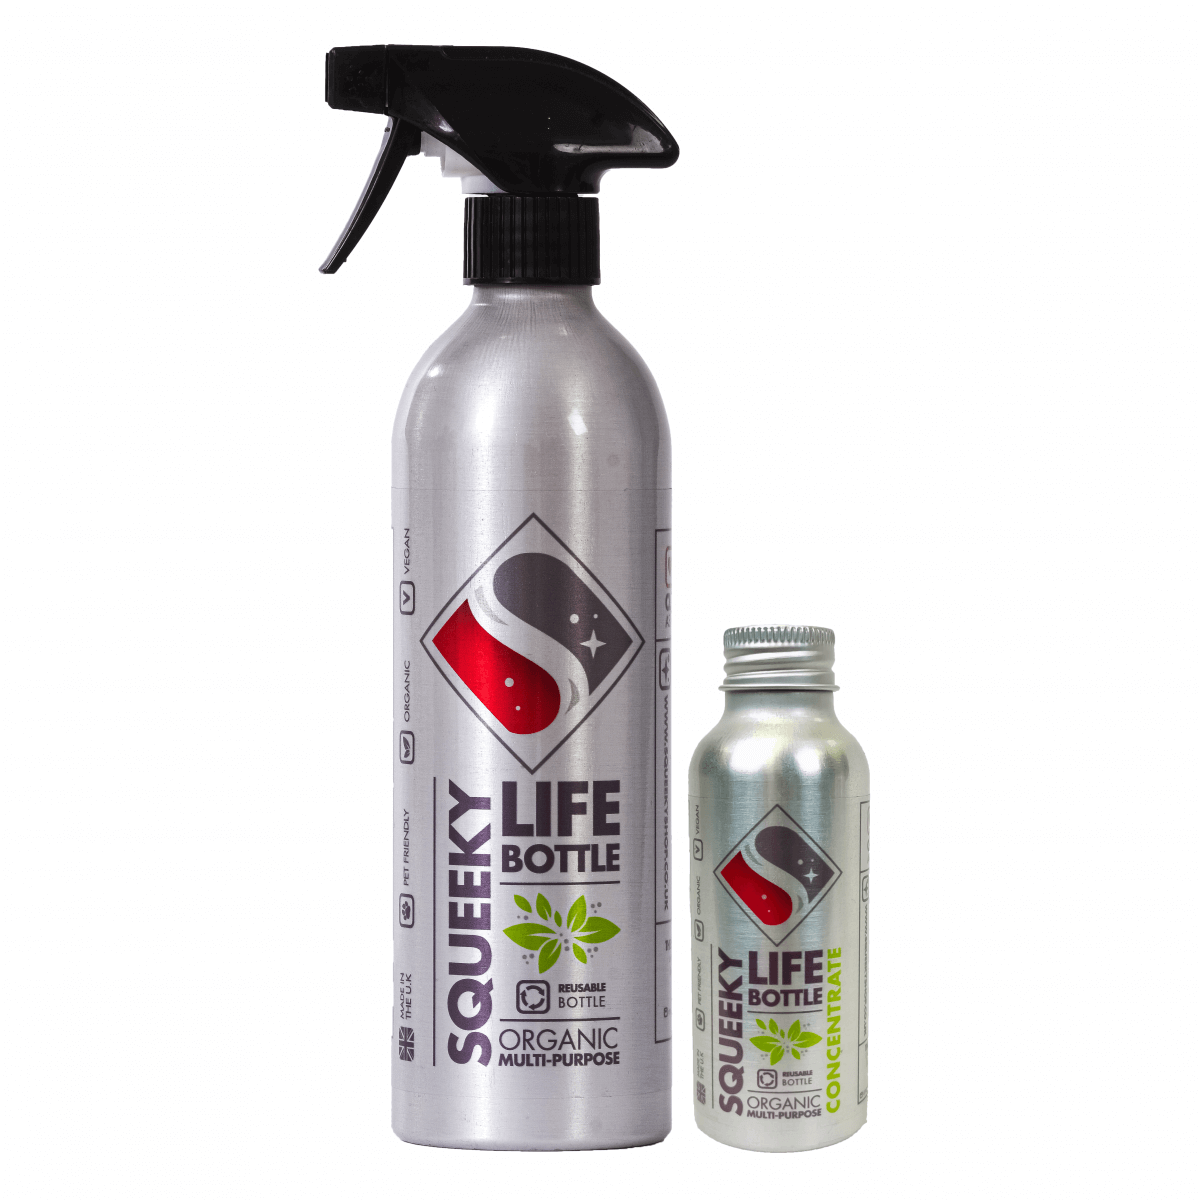 Squeeky Life Organic natural plastic free multi purpose surface cleaner bundle. Aluminium life bottle and concentrate refill side by side